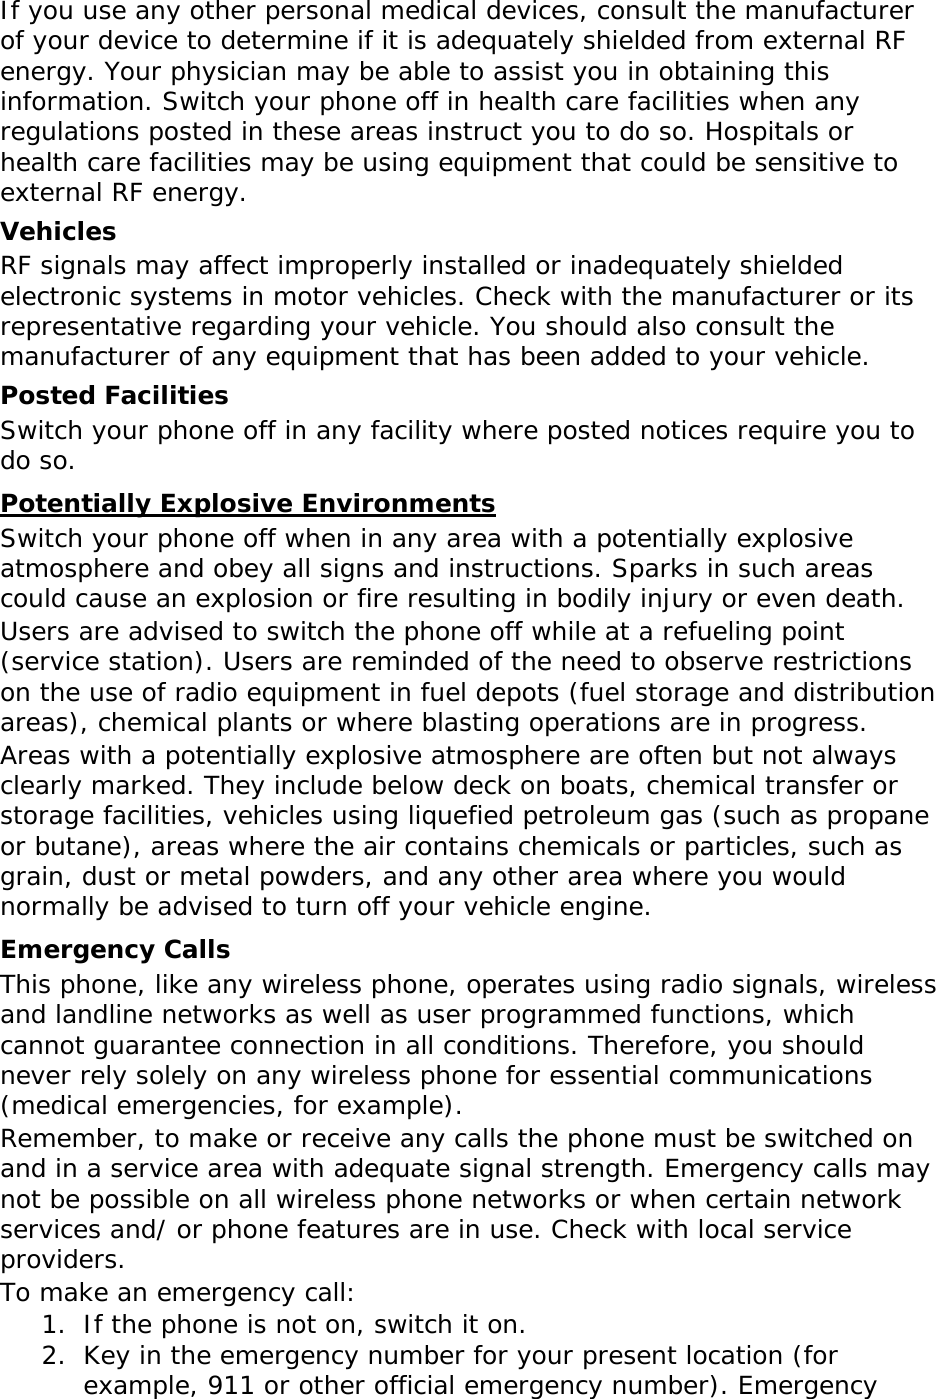 If you use any other personal medical devices, consult the manufacturer of your device to determine if it is adequately shielded from external RF energy. Your physician may be able to assist you in obtaining this information. Switch your phone off in health care facilities when any regulations posted in these areas instruct you to do so. Hospitals or health care facilities may be using equipment that could be sensitive to external RF energy. Vehicles RF signals may affect improperly installed or inadequately shielded electronic systems in motor vehicles. Check with the manufacturer or its representative regarding your vehicle. You should also consult the manufacturer of any equipment that has been added to your vehicle. Posted Facilities Switch your phone off in any facility where posted notices require you to do so. Potentially Explosive Environments Switch your phone off when in any area with a potentially explosive atmosphere and obey all signs and instructions. Sparks in such areas could cause an explosion or fire resulting in bodily injury or even death. Users are advised to switch the phone off while at a refueling point (service station). Users are reminded of the need to observe restrictions on the use of radio equipment in fuel depots (fuel storage and distribution areas), chemical plants or where blasting operations are in progress. Areas with a potentially explosive atmosphere are often but not always clearly marked. They include below deck on boats, chemical transfer or storage facilities, vehicles using liquefied petroleum gas (such as propane or butane), areas where the air contains chemicals or particles, such as grain, dust or metal powders, and any other area where you would normally be advised to turn off your vehicle engine. Emergency Calls This phone, like any wireless phone, operates using radio signals, wireless and landline networks as well as user programmed functions, which cannot guarantee connection in all conditions. Therefore, you should never rely solely on any wireless phone for essential communications (medical emergencies, for example). Remember, to make or receive any calls the phone must be switched on and in a service area with adequate signal strength. Emergency calls may not be possible on all wireless phone networks or when certain network services and/ or phone features are in use. Check with local service providers. To make an emergency call: 1. If the phone is not on, switch it on. 2. Key in the emergency number for your present location (for example, 911 or other official emergency number). Emergency 